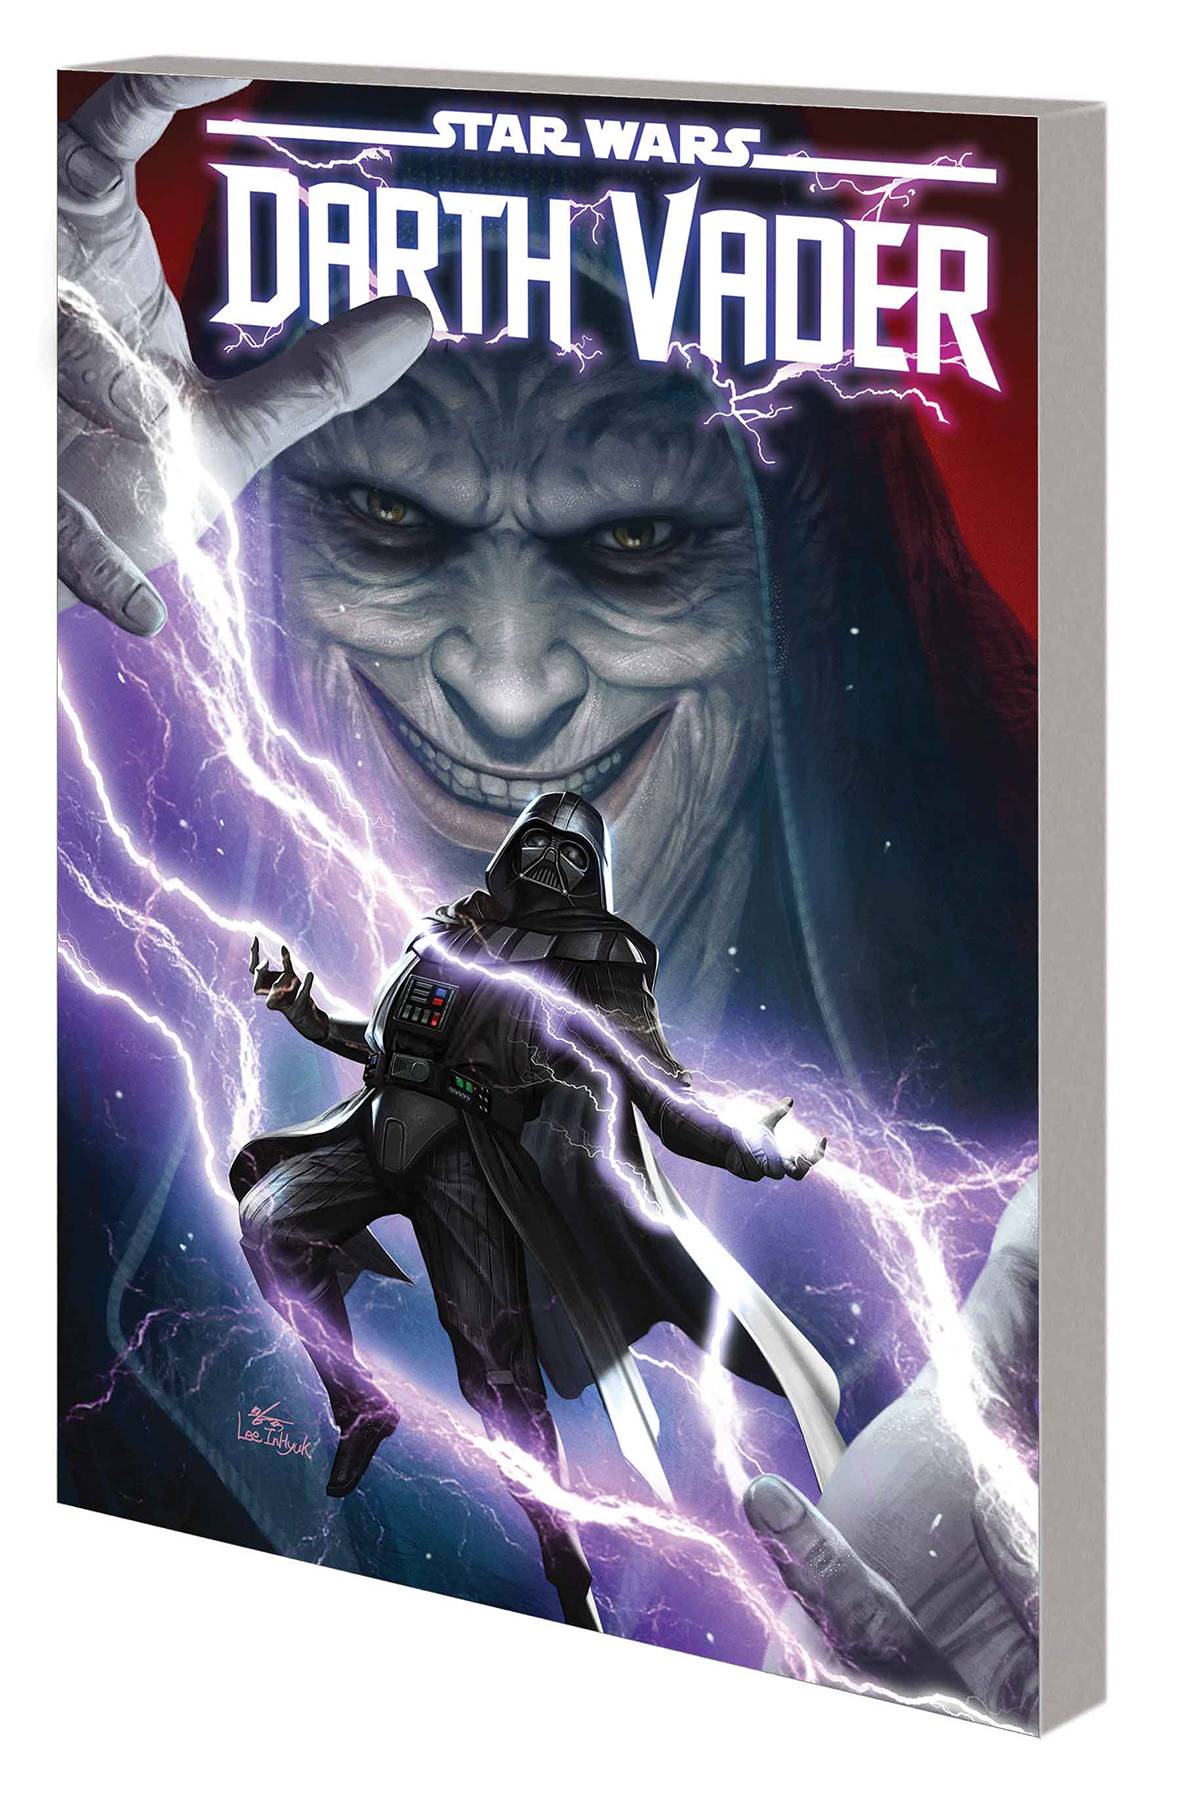 STAR WARS DARTH VADER BY GREG PAK TP VOL 02 INTO THE FIRE